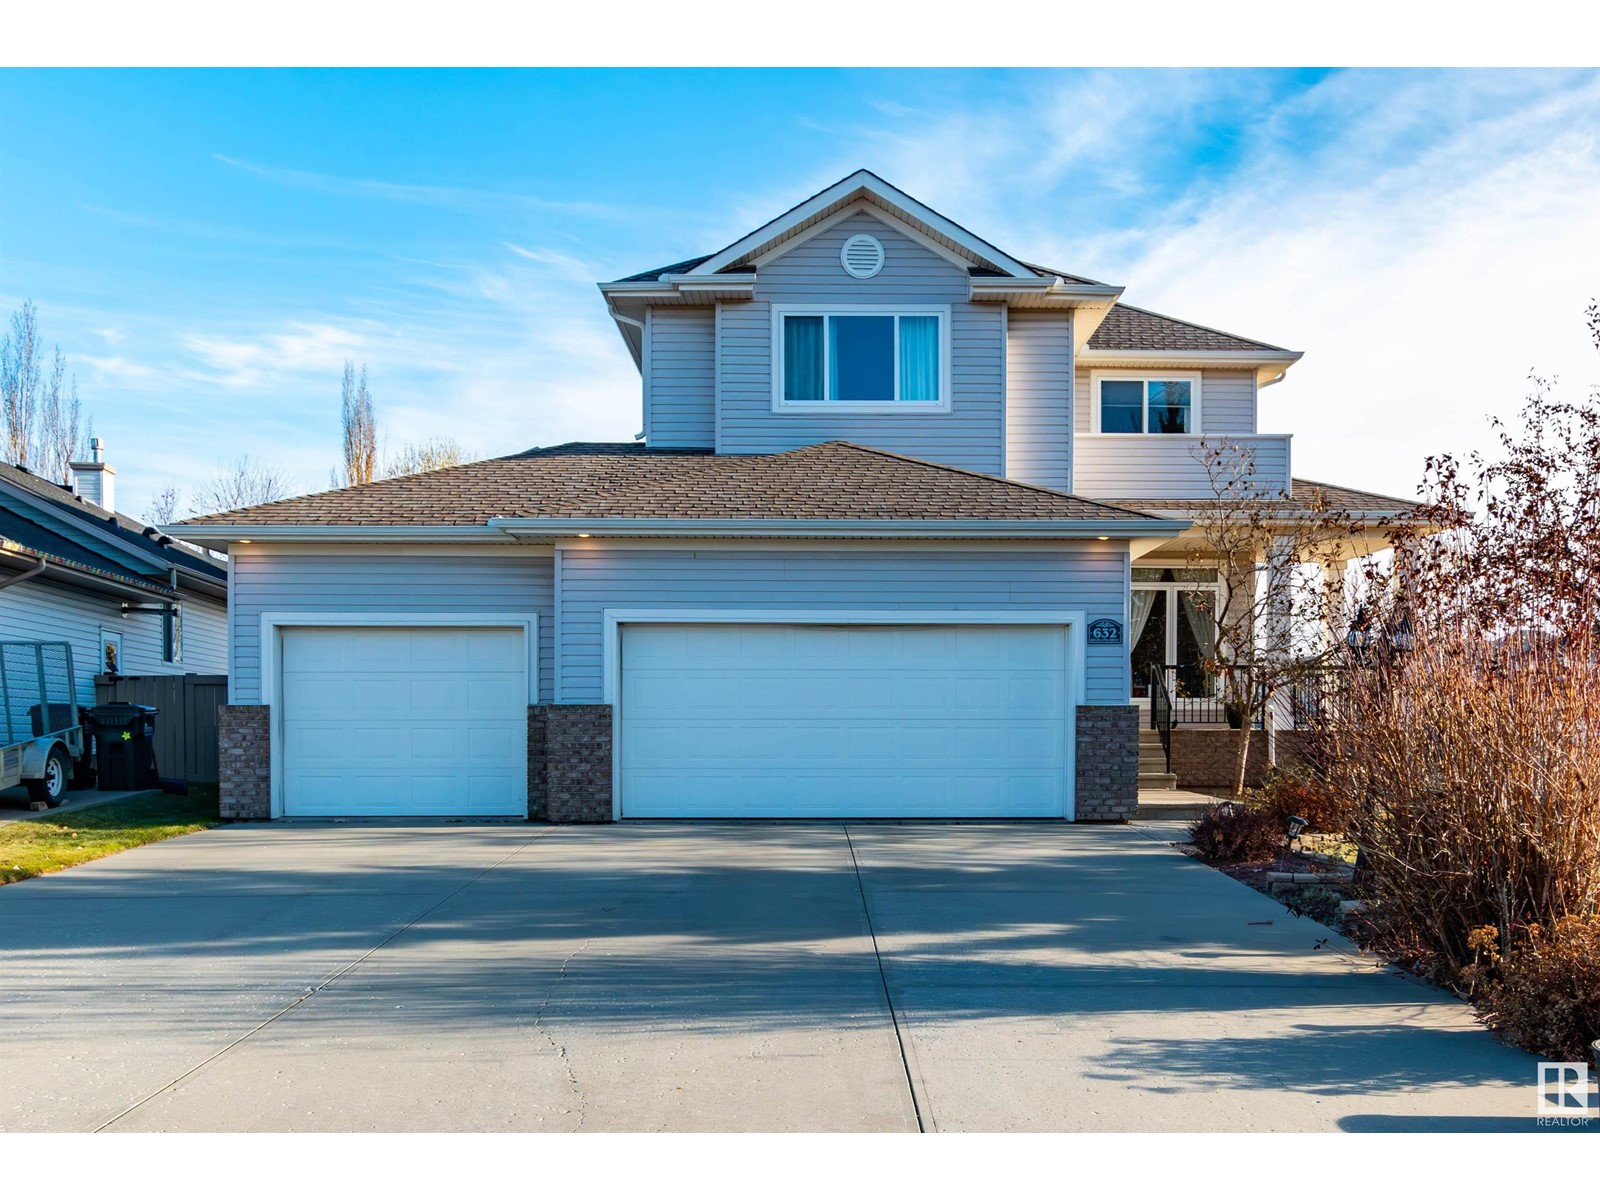 632 HIGHLAND DR located in Sherwood Park, Alberta